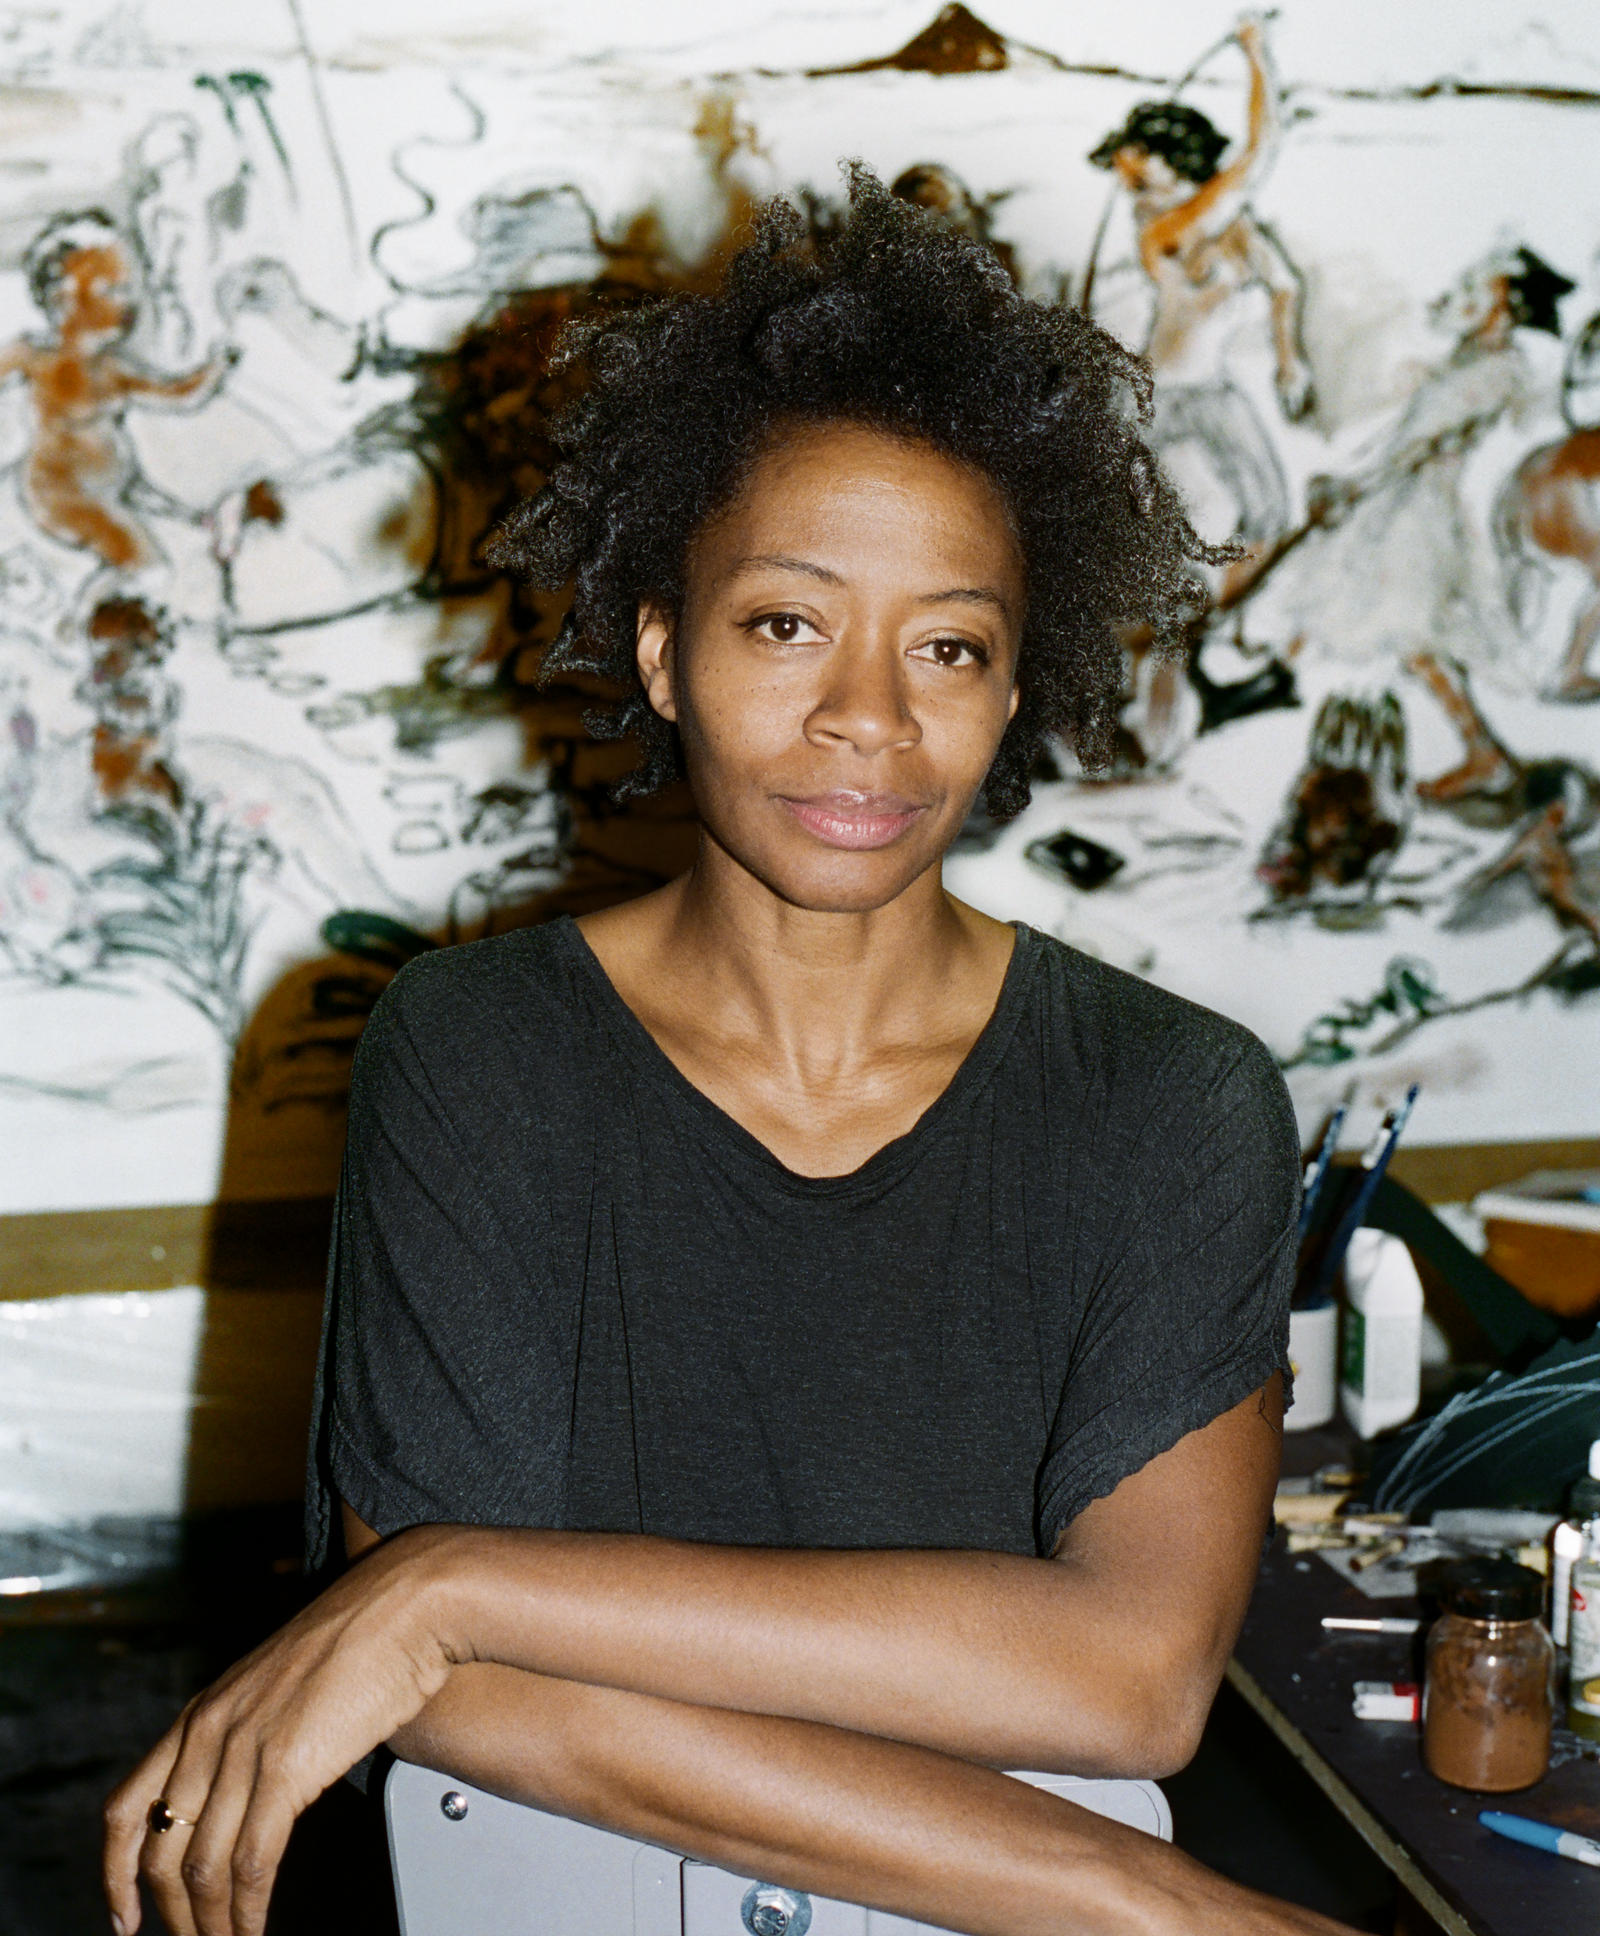 A photographic portrait of a woman artist in a black t-shirt with studio works in the background